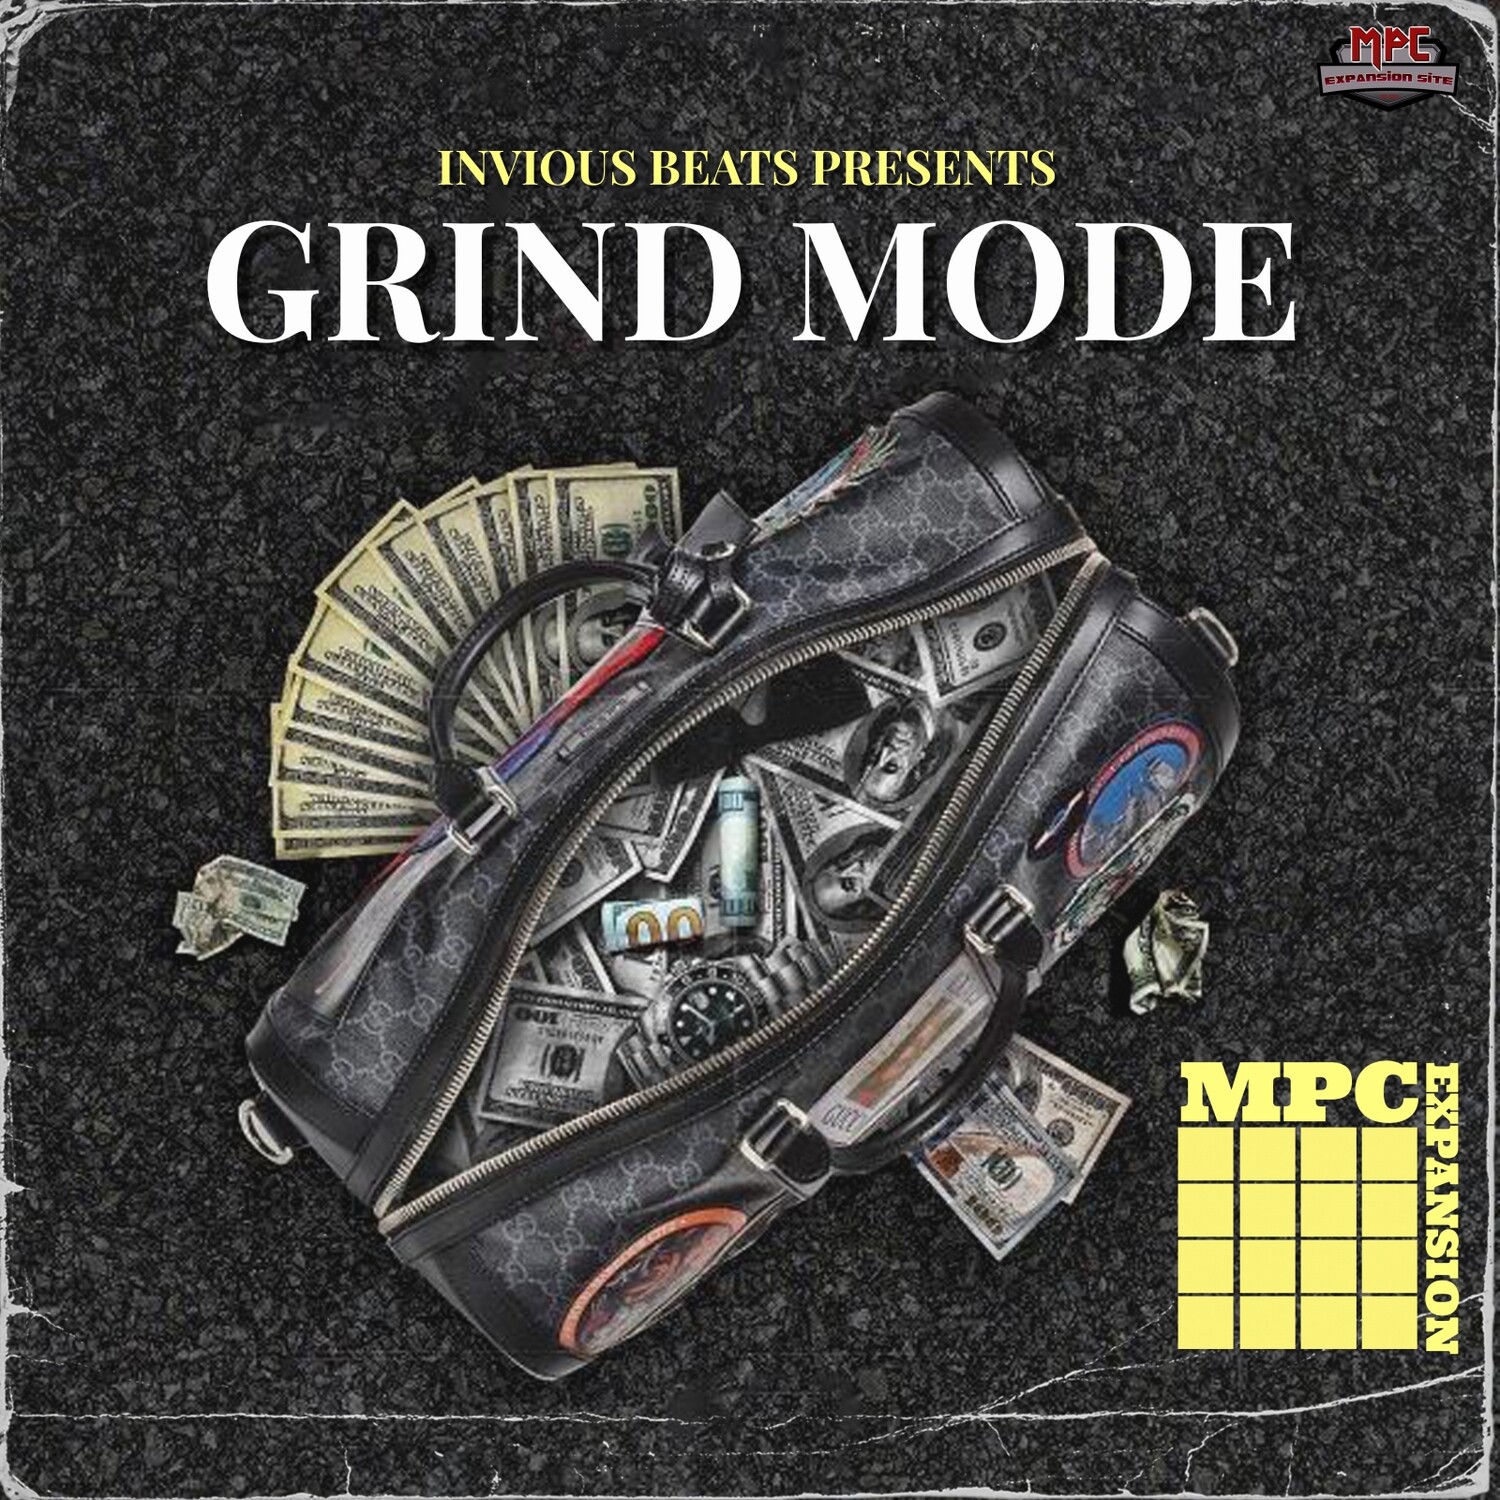 MPC EXPANSION 'GRIND MODE' by INVIOUS